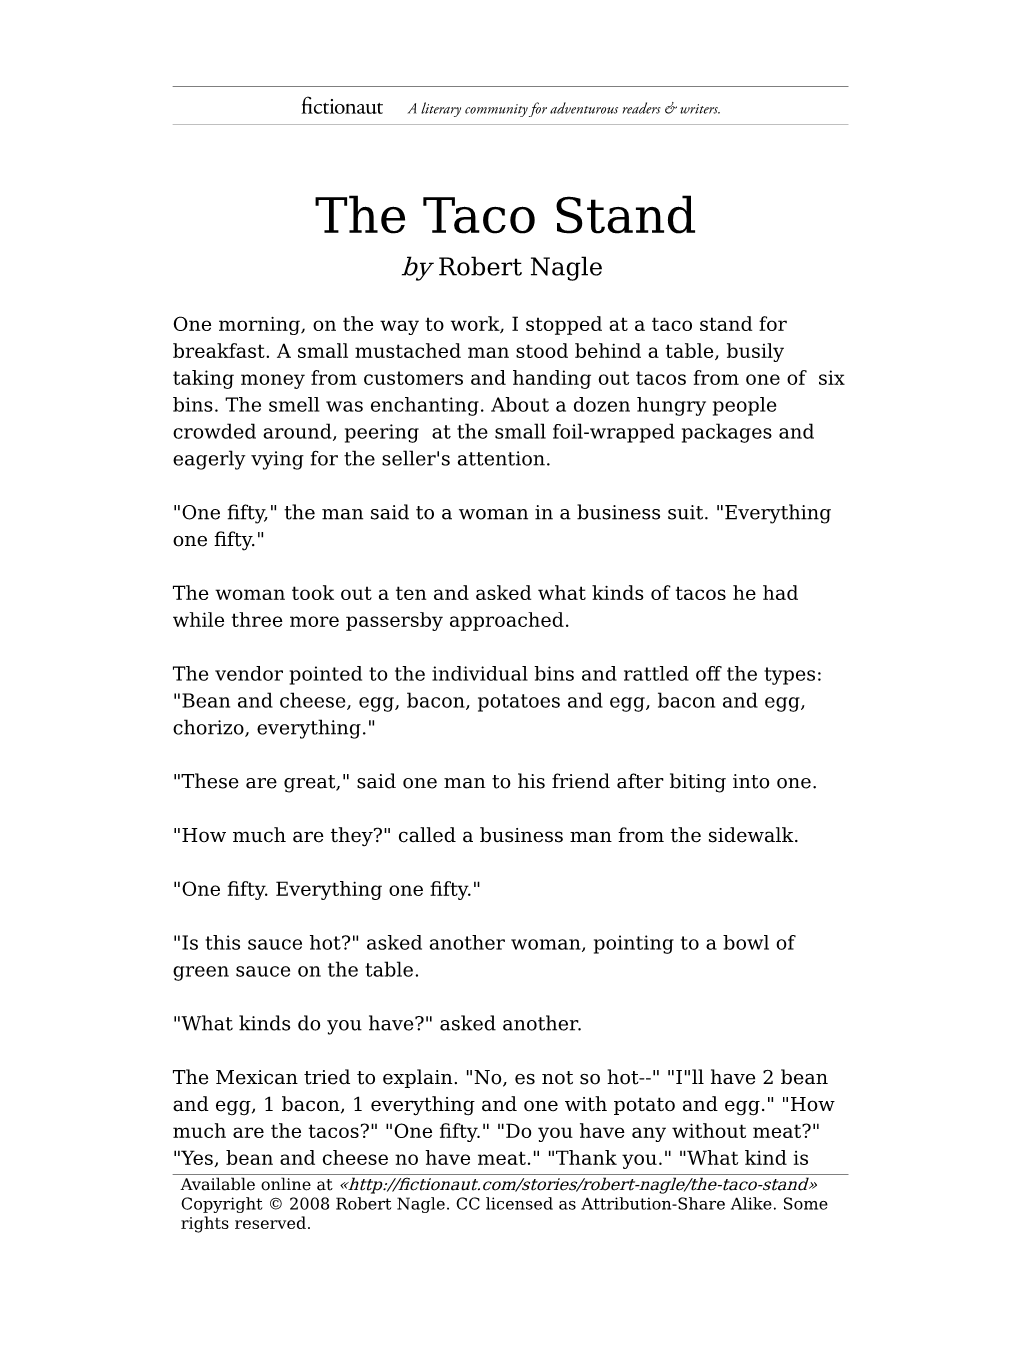 The Taco Stand by Robert Nagle